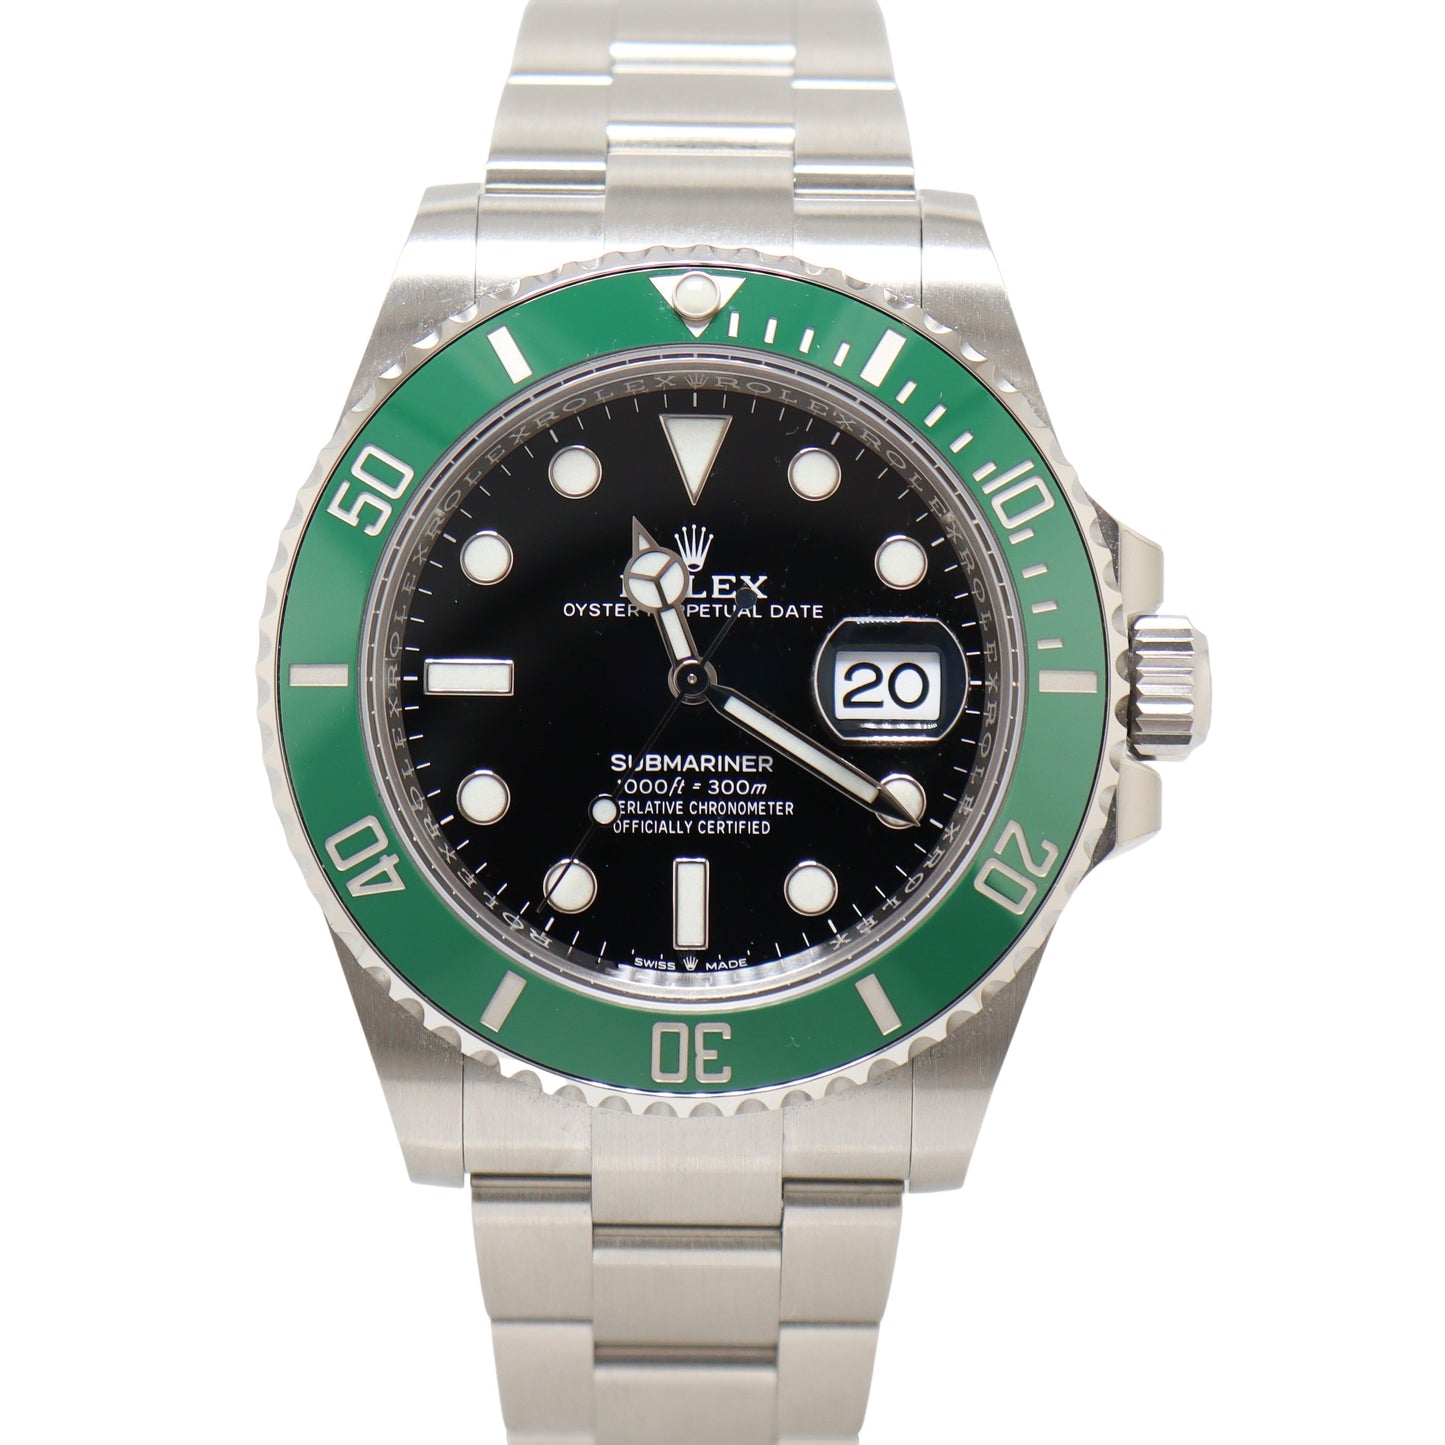 Rolex Submariner "Starbucks" Stainless Steel 41mm Black Dot Dial Watch Reference# 126610LV